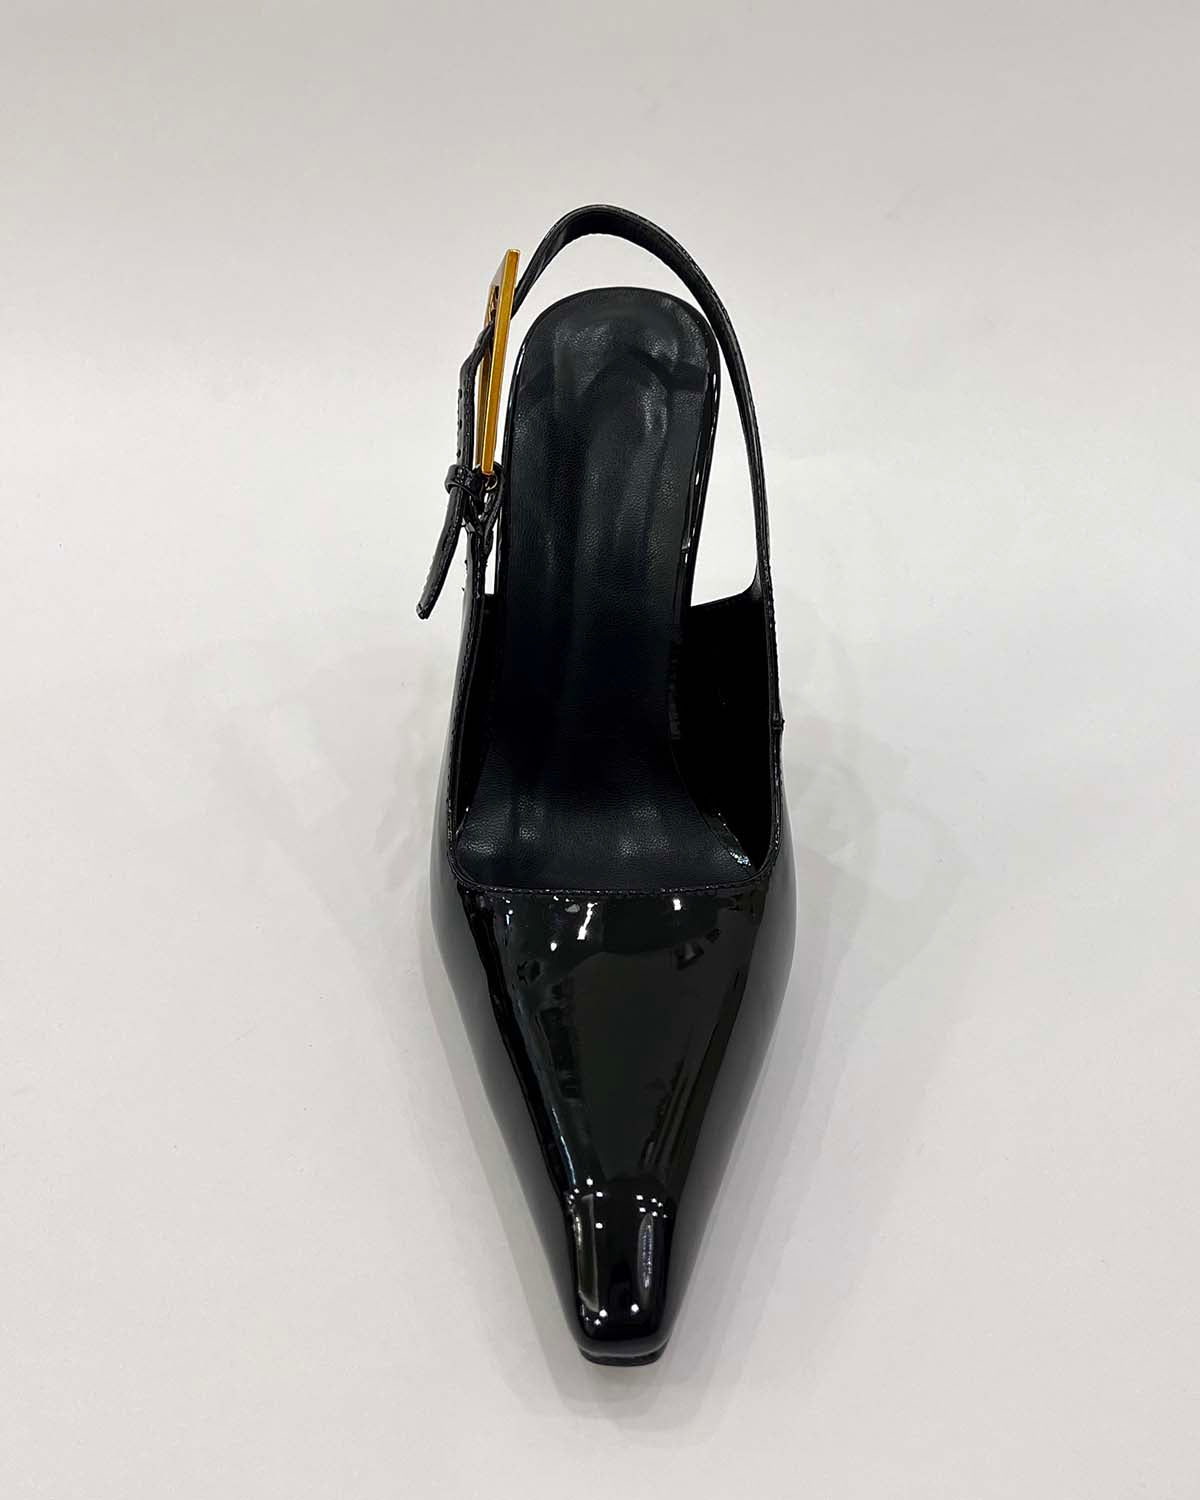 Patent leather pointed toe slingback metal heels pumps